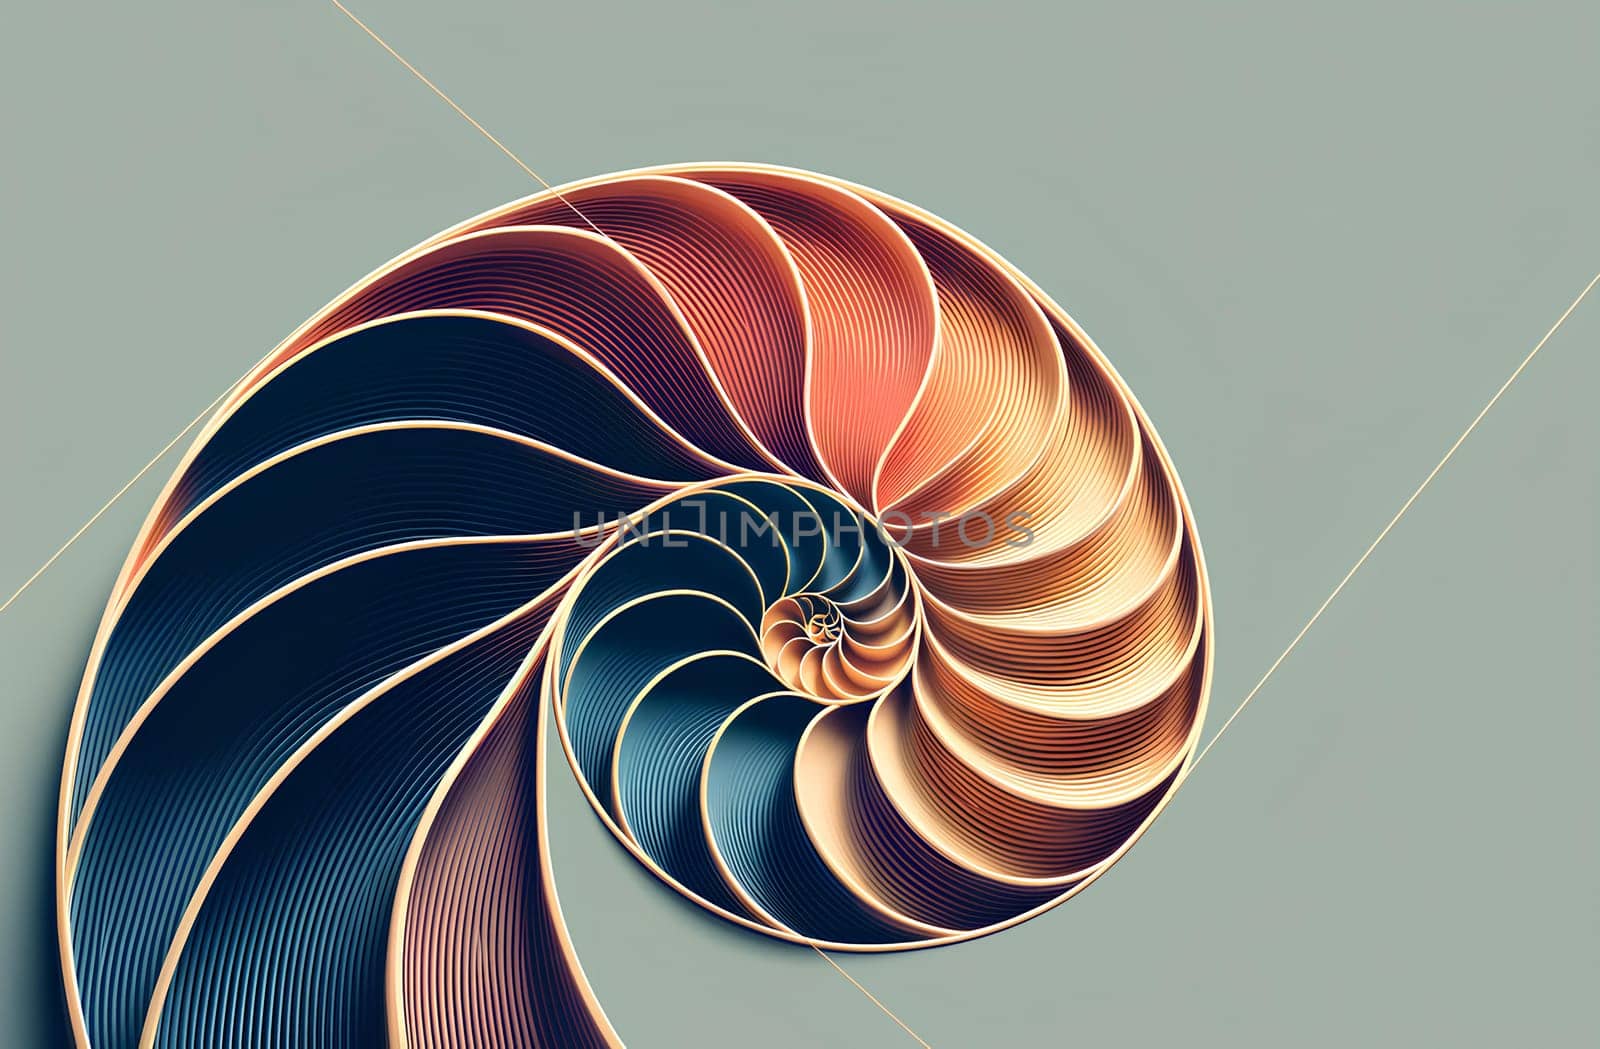 Spiral Fibonacci pattern in different tones with plenty of copy space on a gray background.